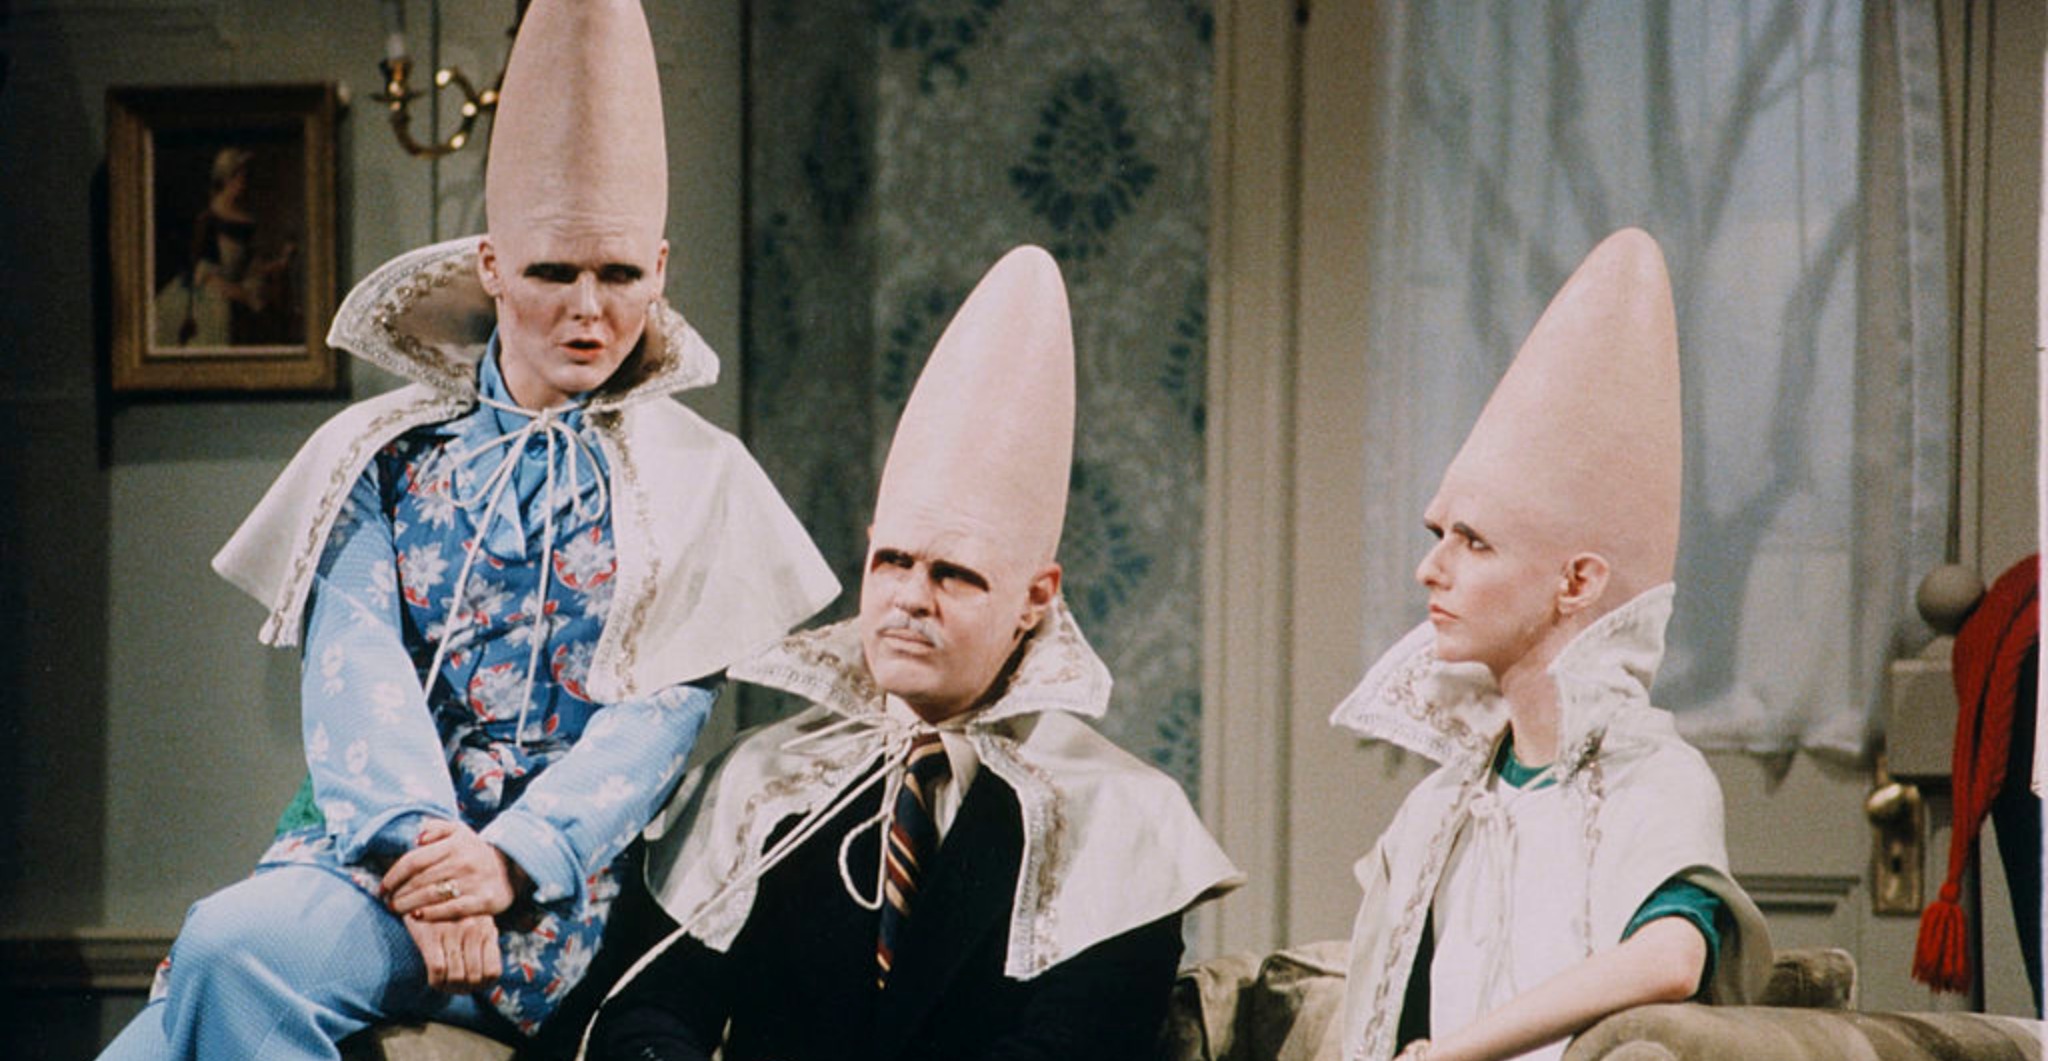 Who played connie conehead